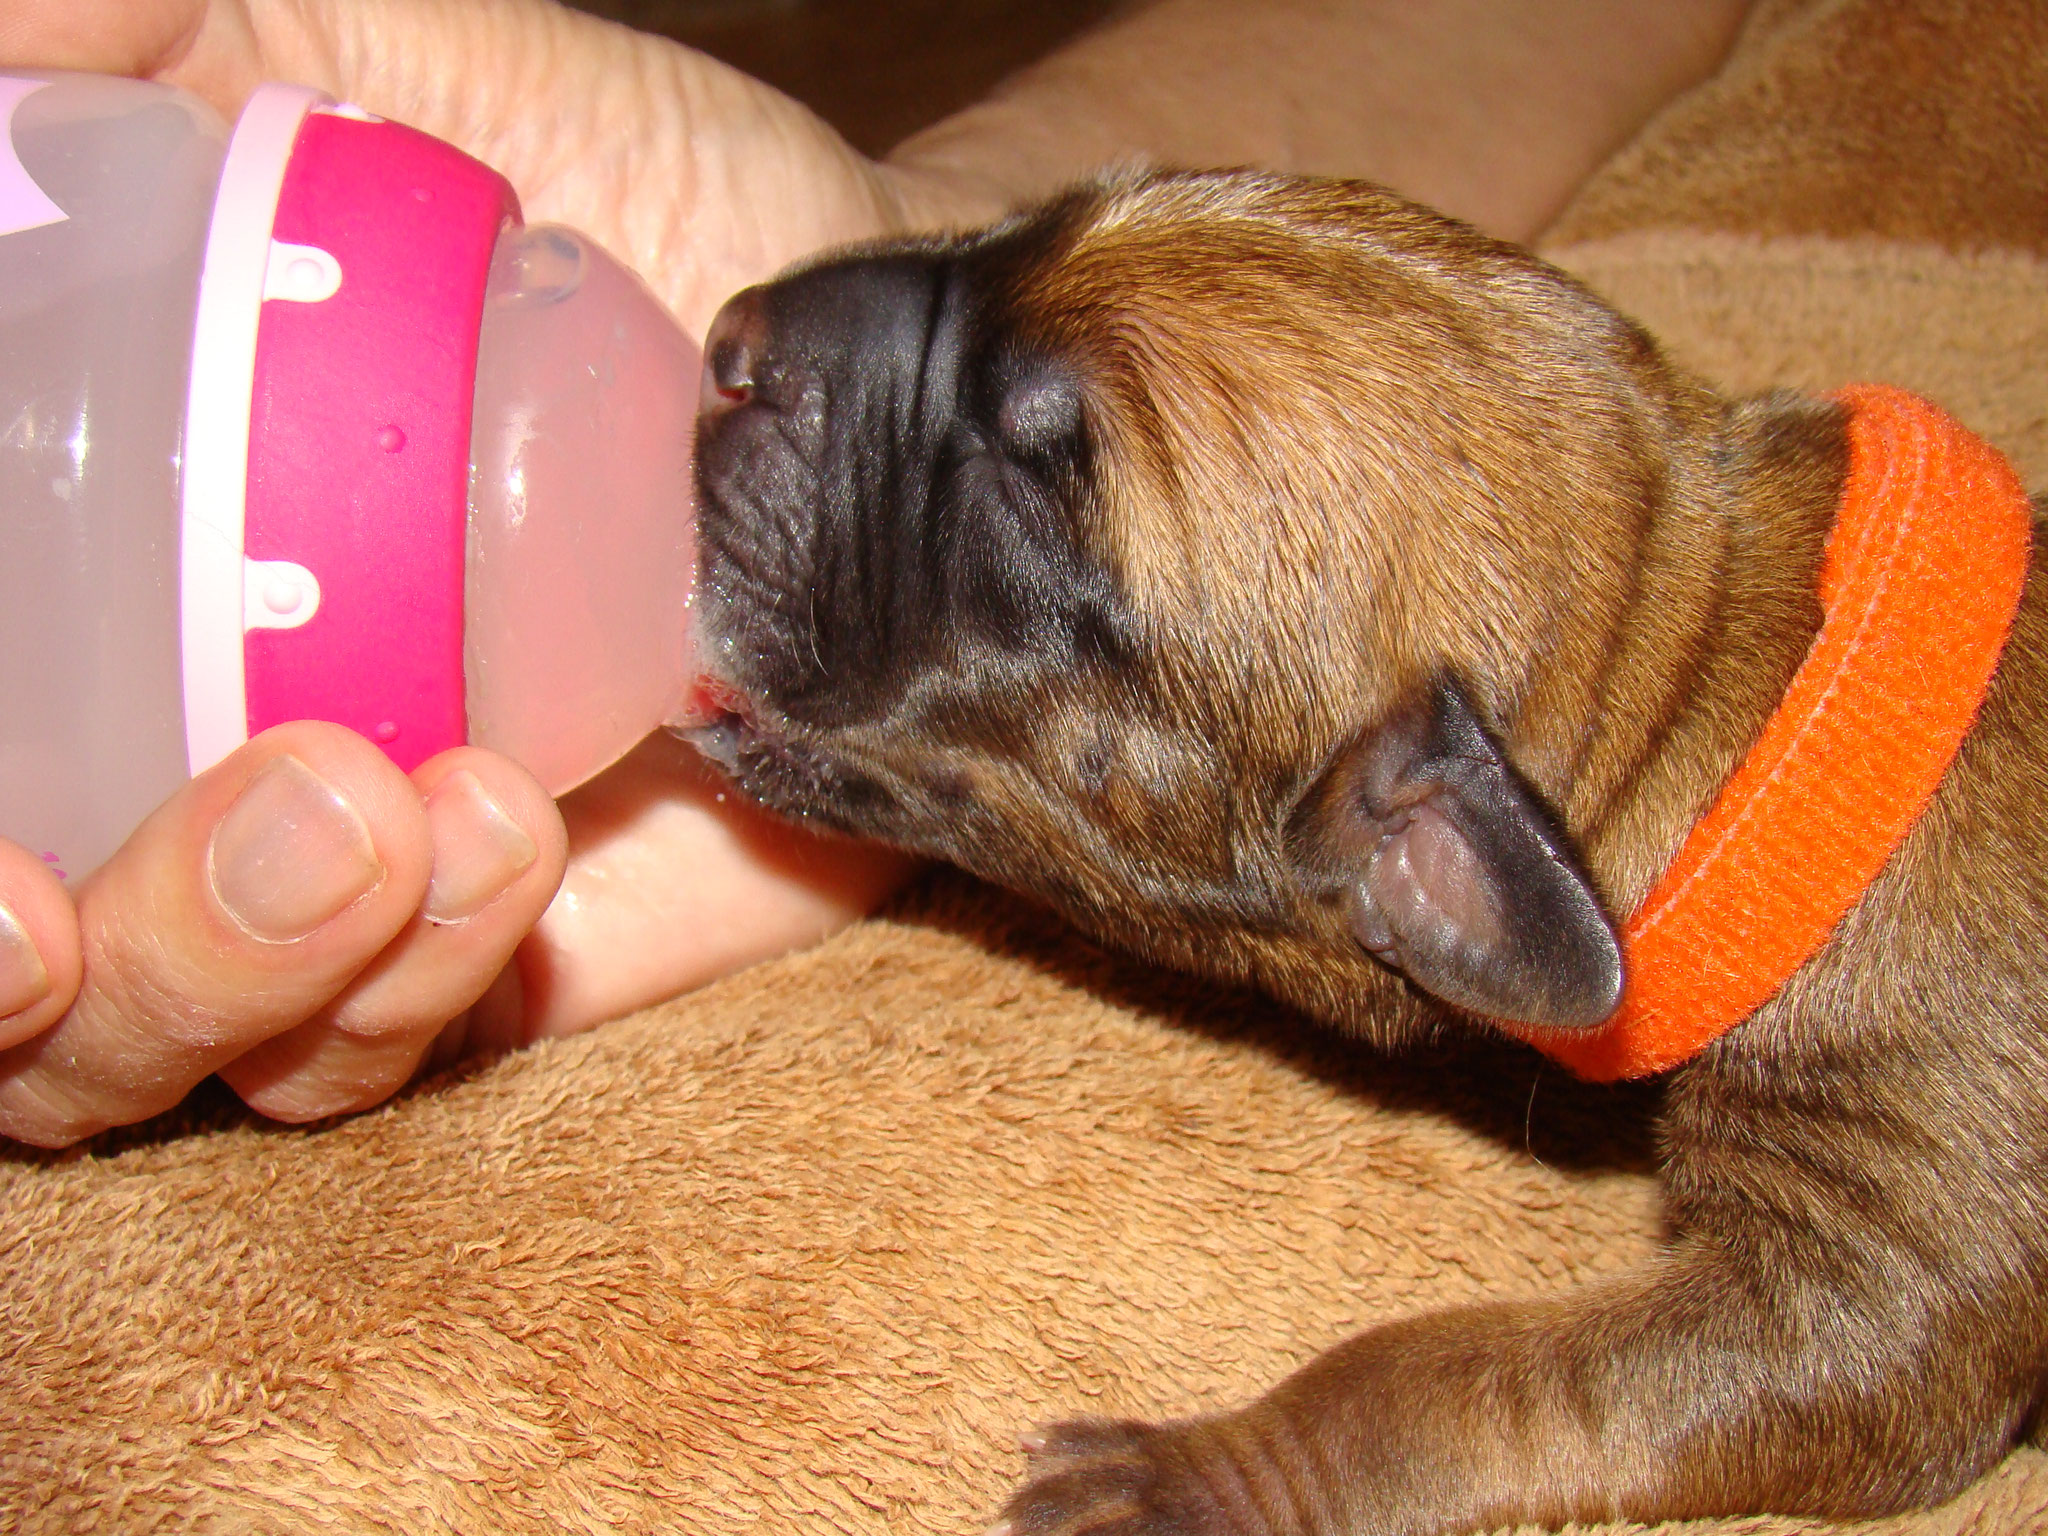 Bottle Feeding a Chicken broth, Pedialyte and digestive enzyme mixture to keep the pups hydrated.